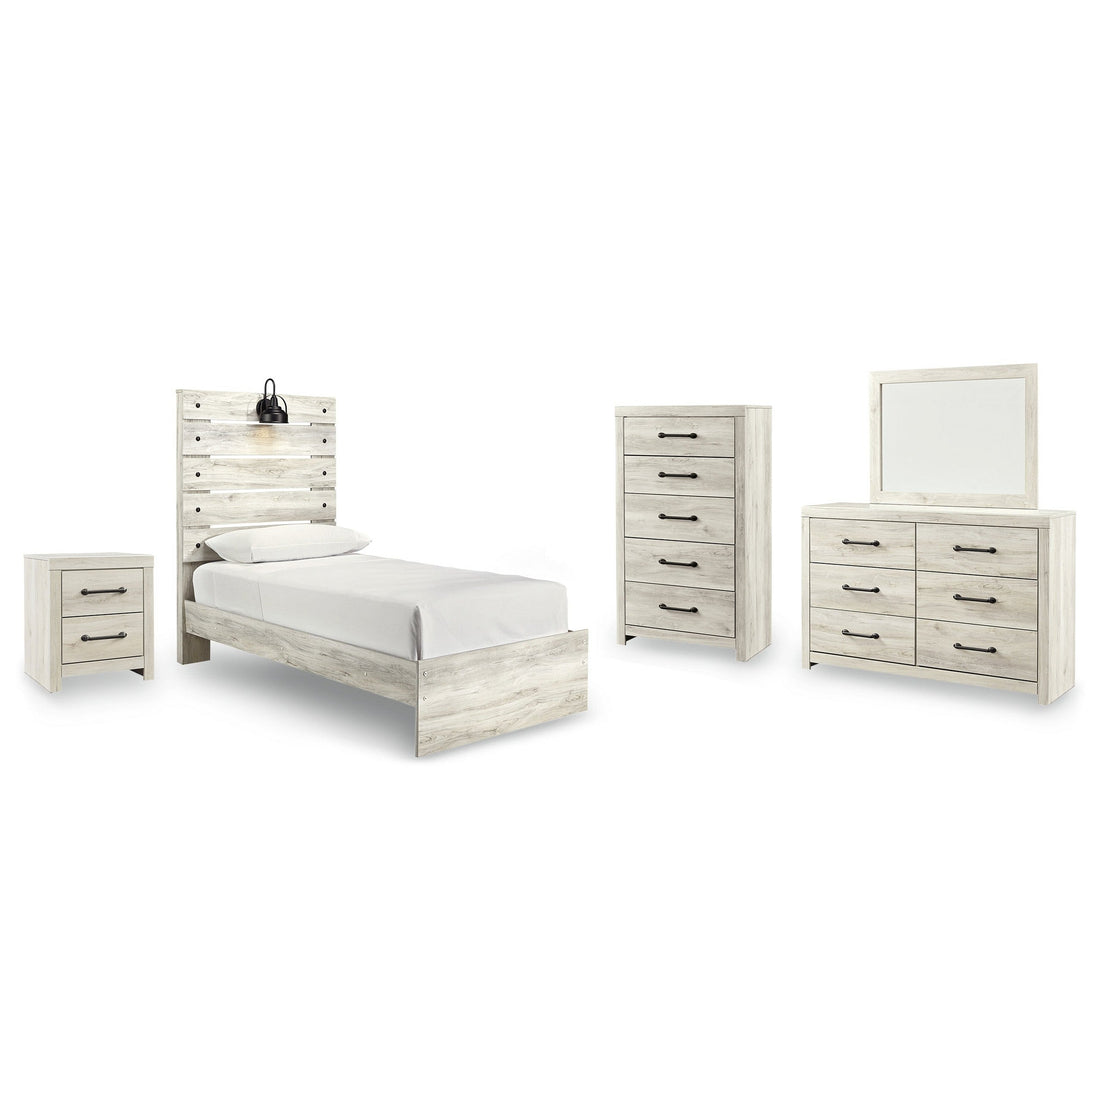 Cambeck Twin Panel Bed, Dresser, Mirror, Chest, and Nightstand Ash-B192B59